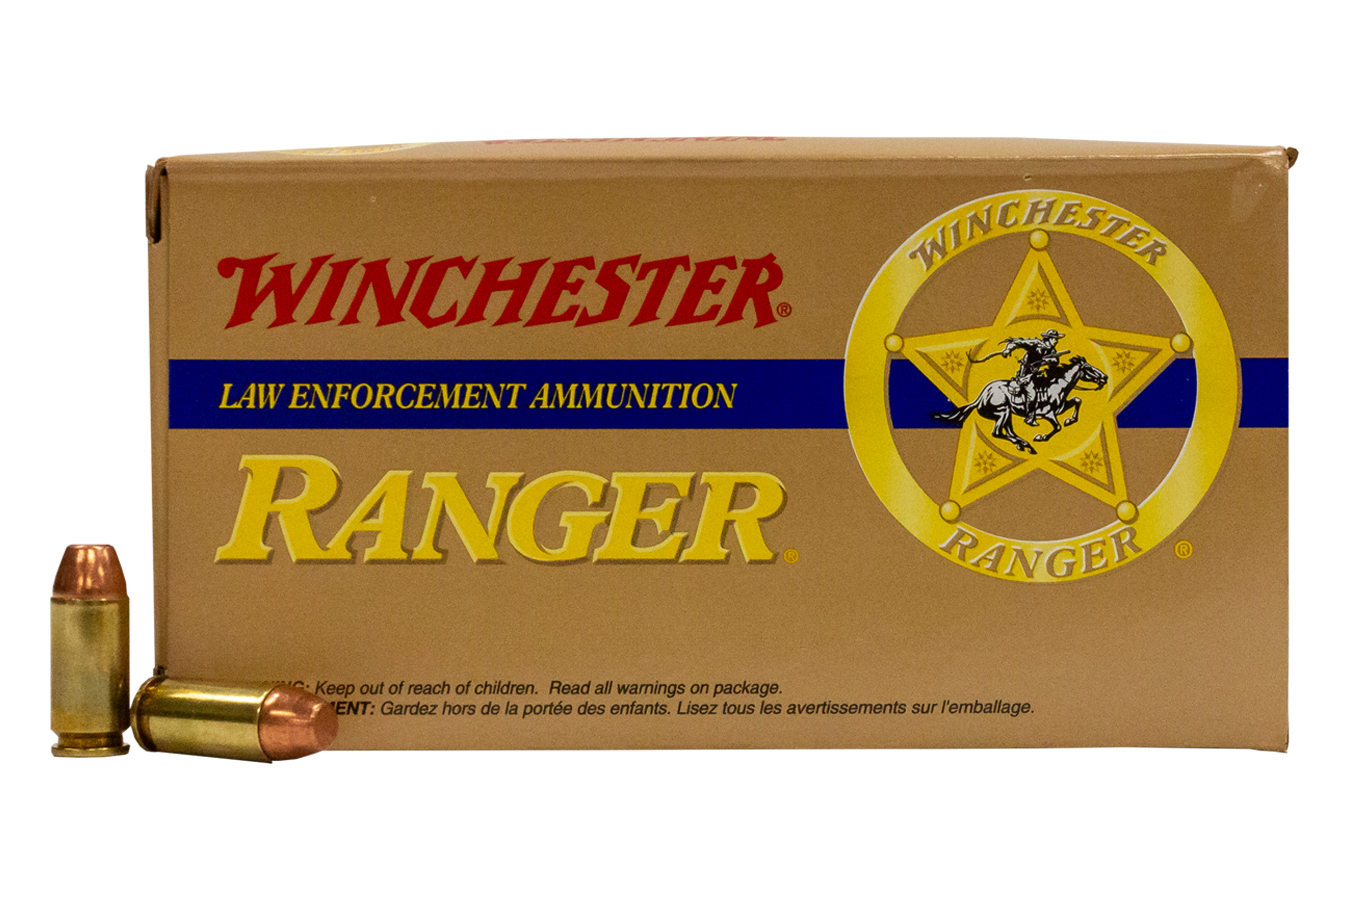 WINCHESTER AMMO 40 SW 180 GR FMJ REDUCED LEAD RANGER